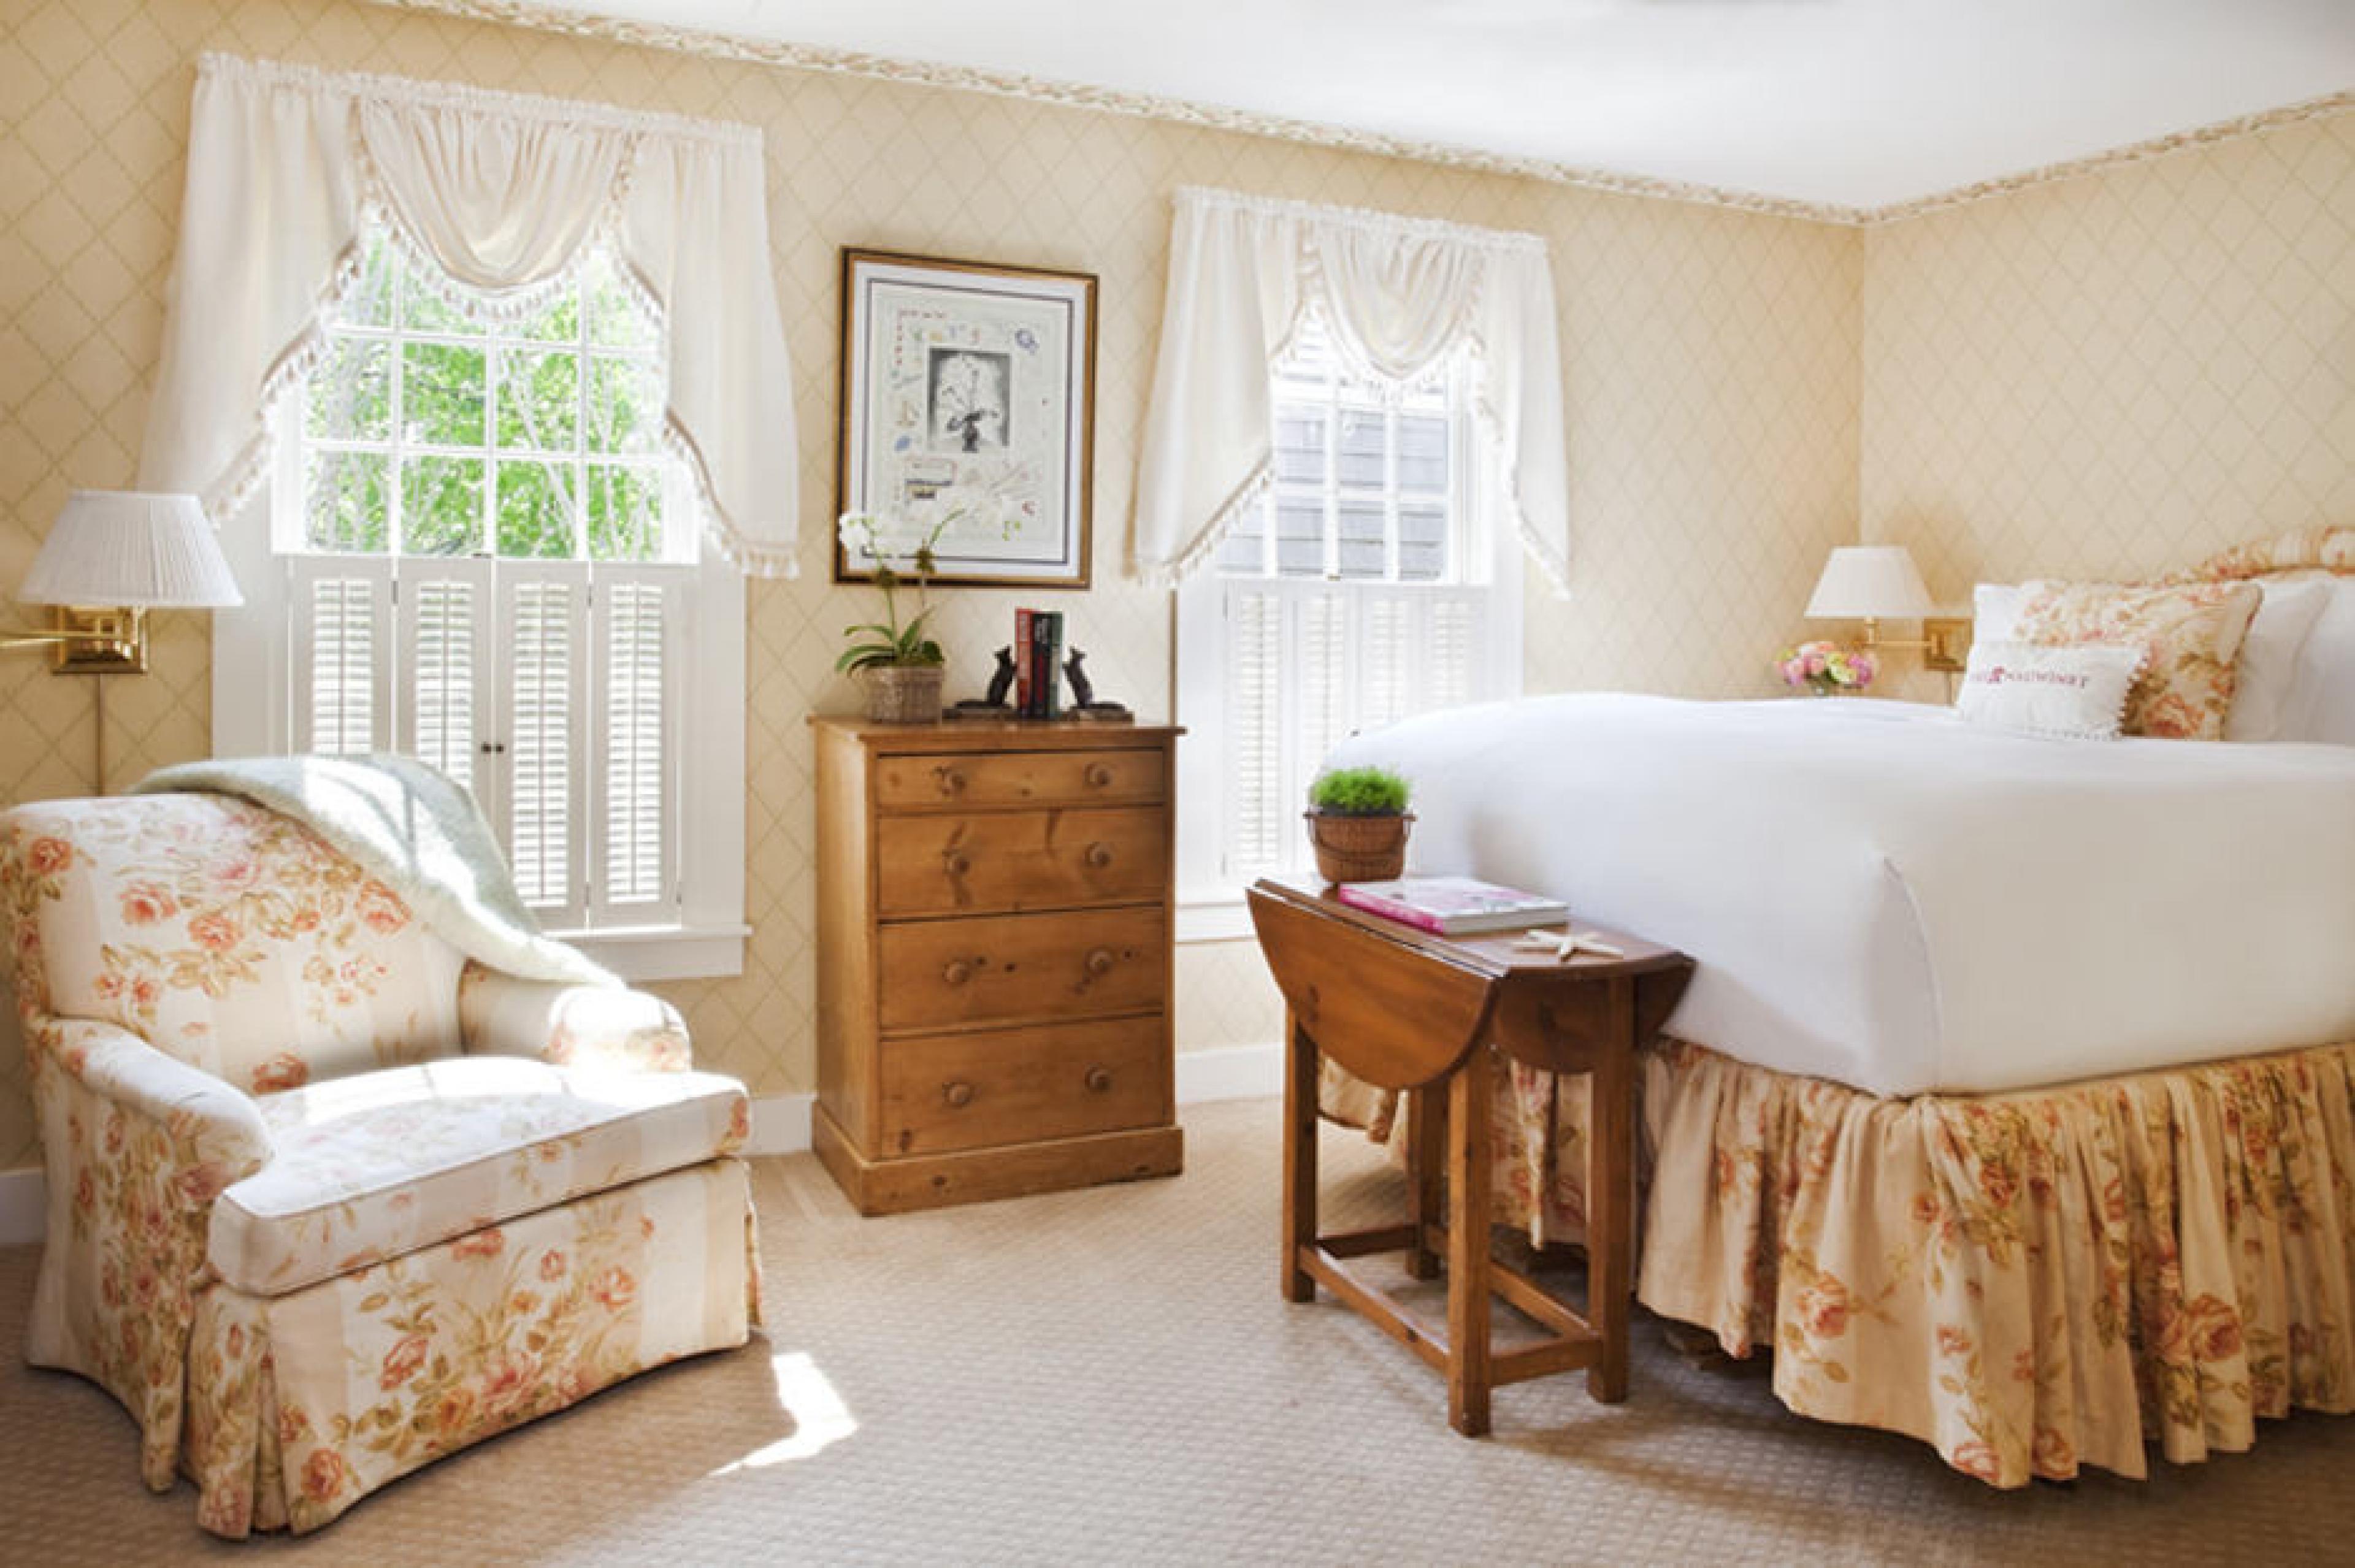 Suite at Wauwinet, Nantucket, New England